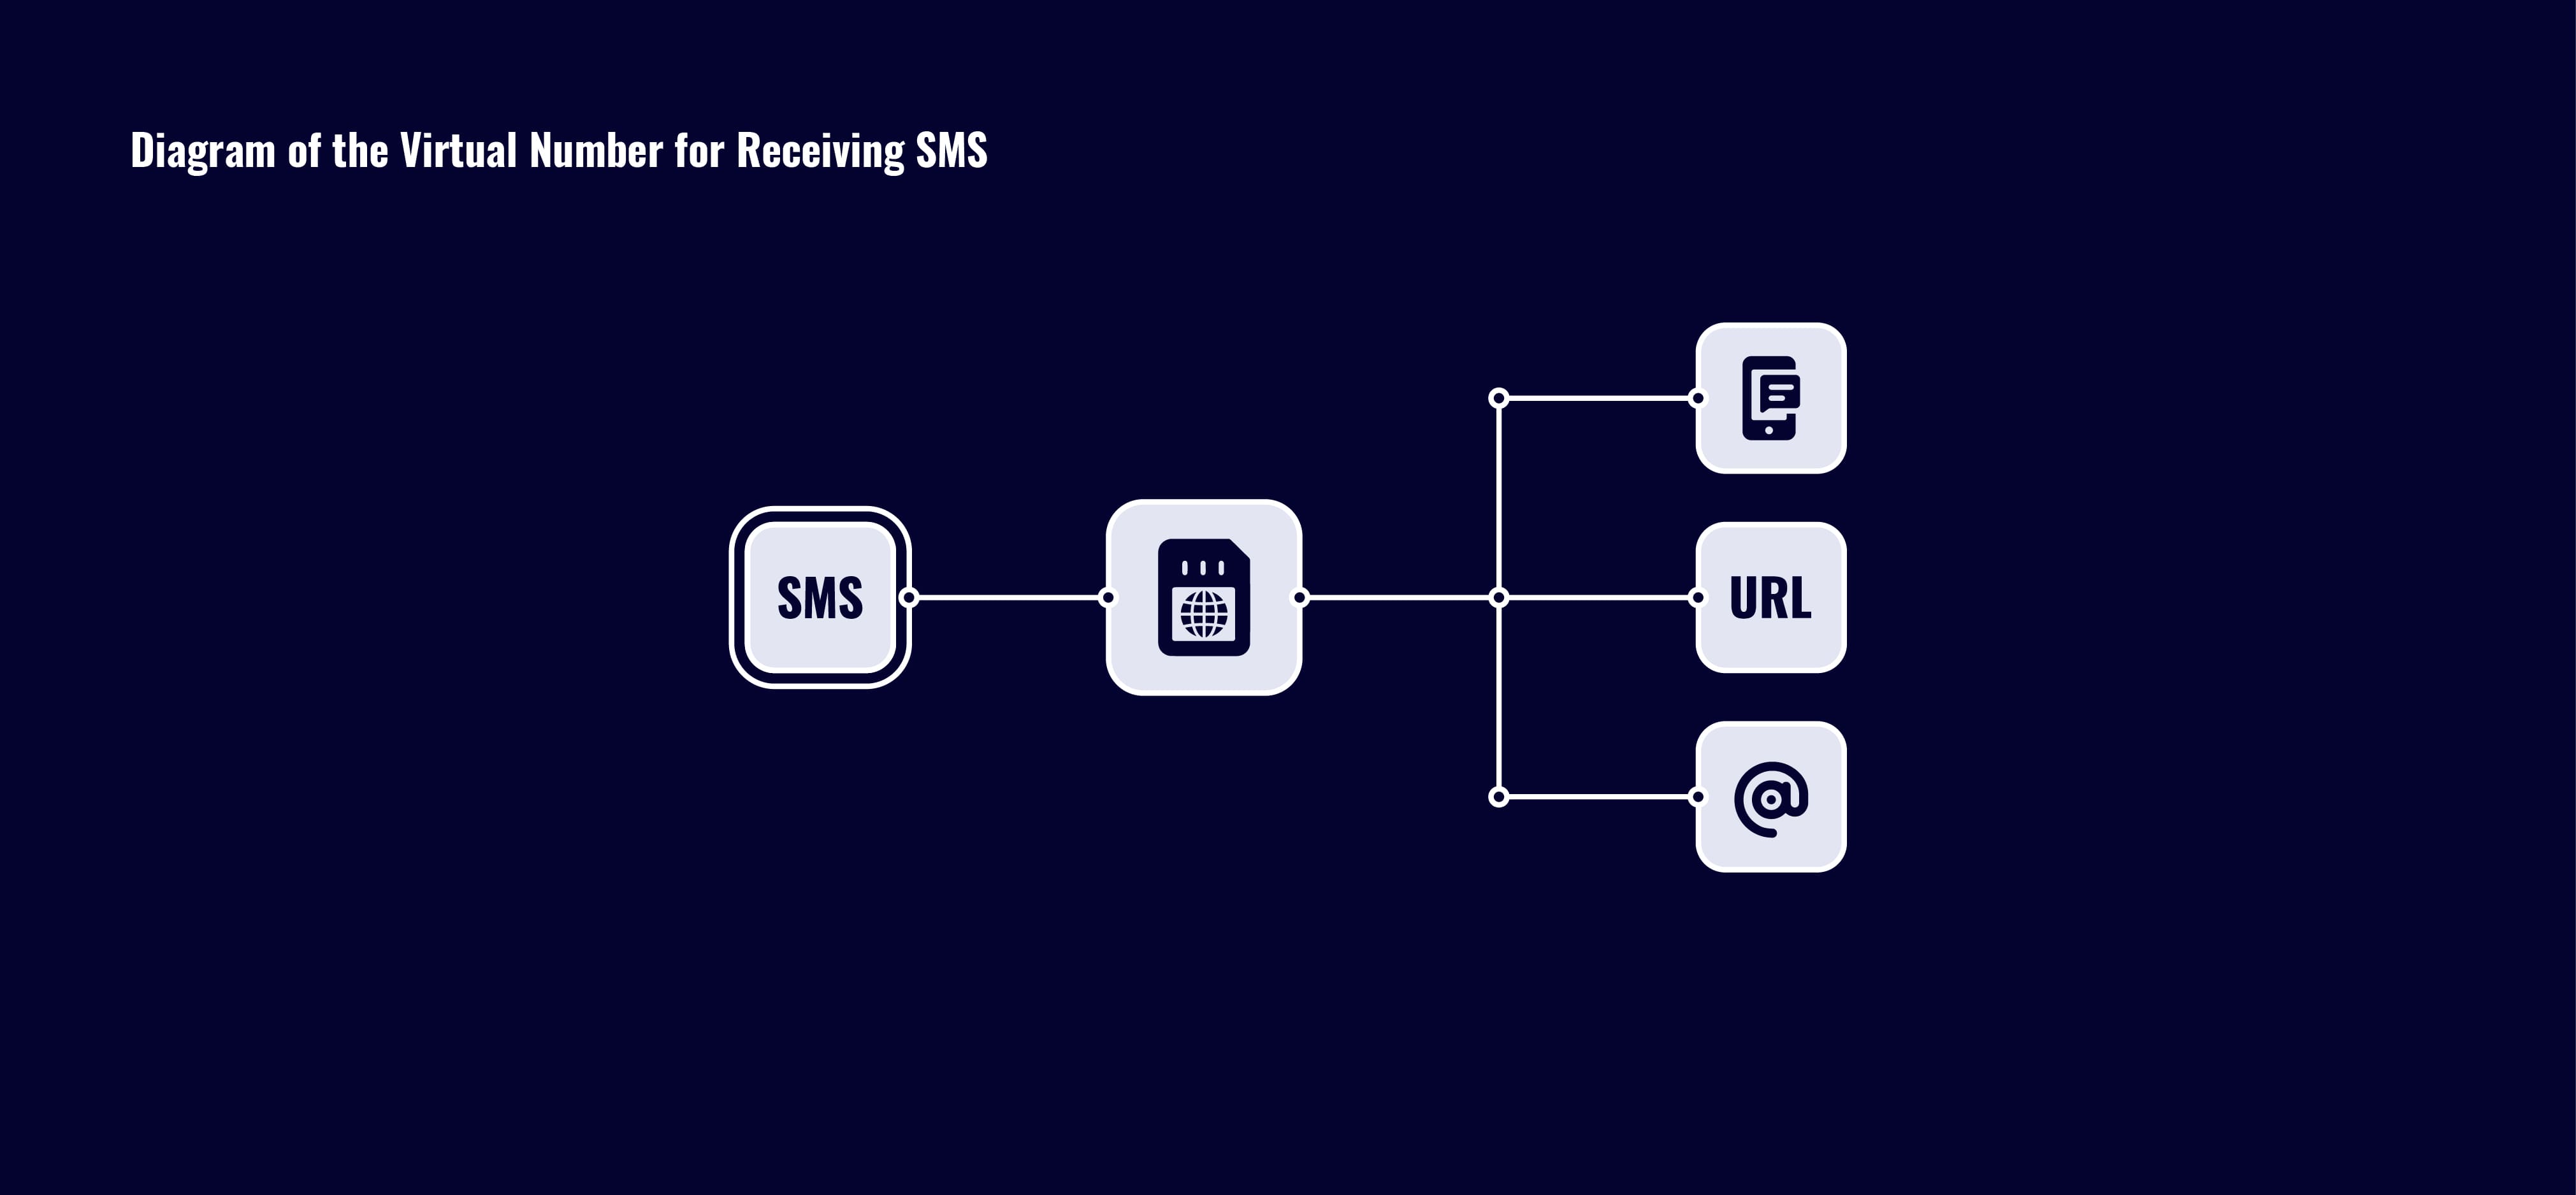 How virtual SMS number forwards messages